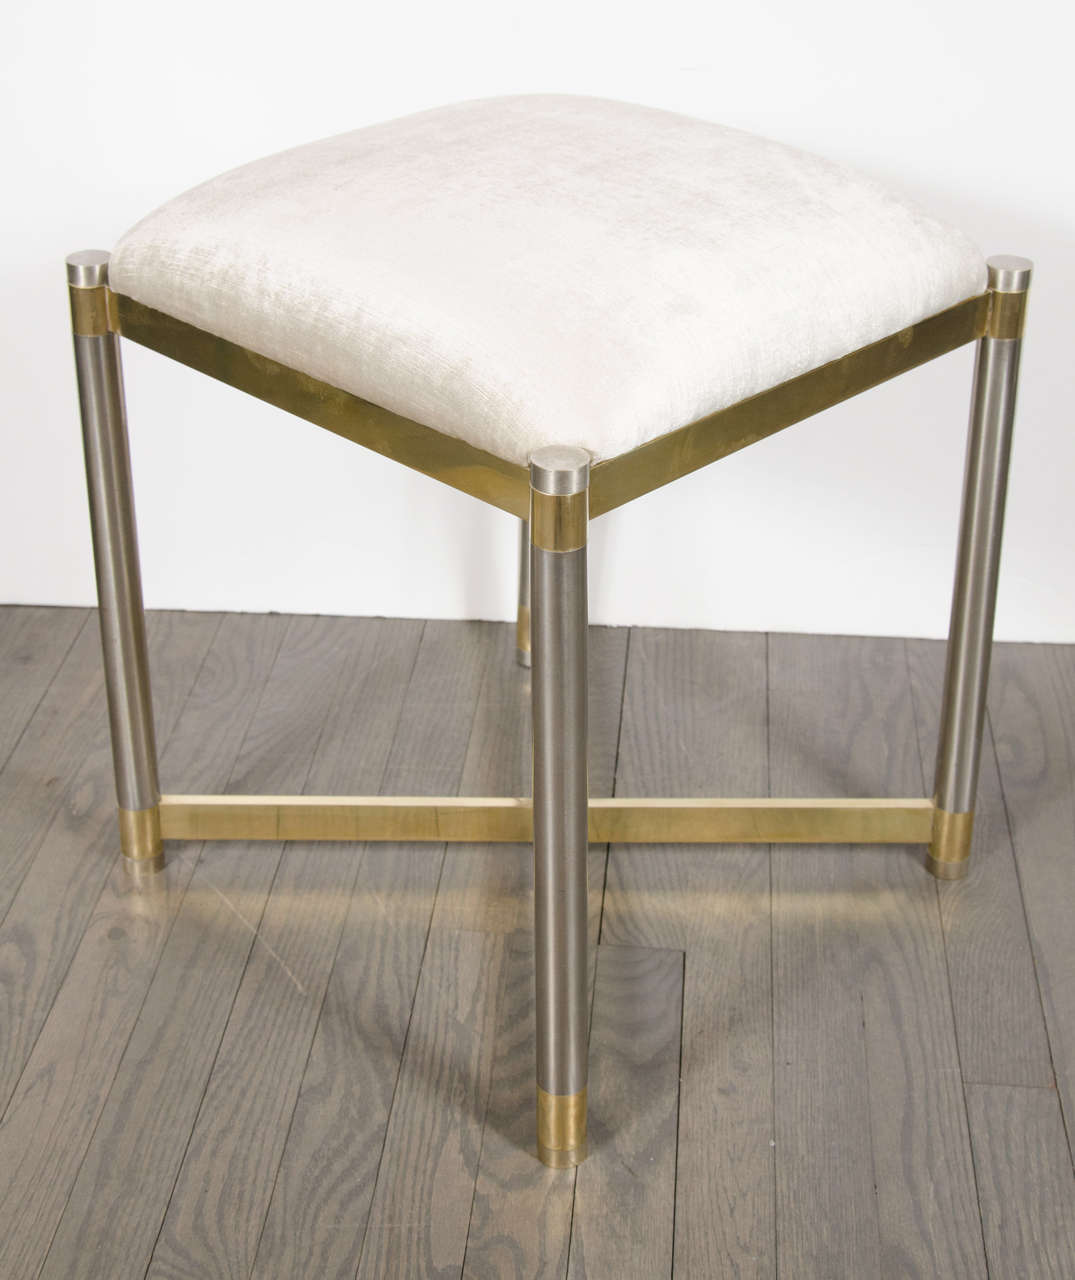 Late 20th Century Mid-Century Modern Chrome & Brass X-Form Stool in the Manner of Karl Springer For Sale